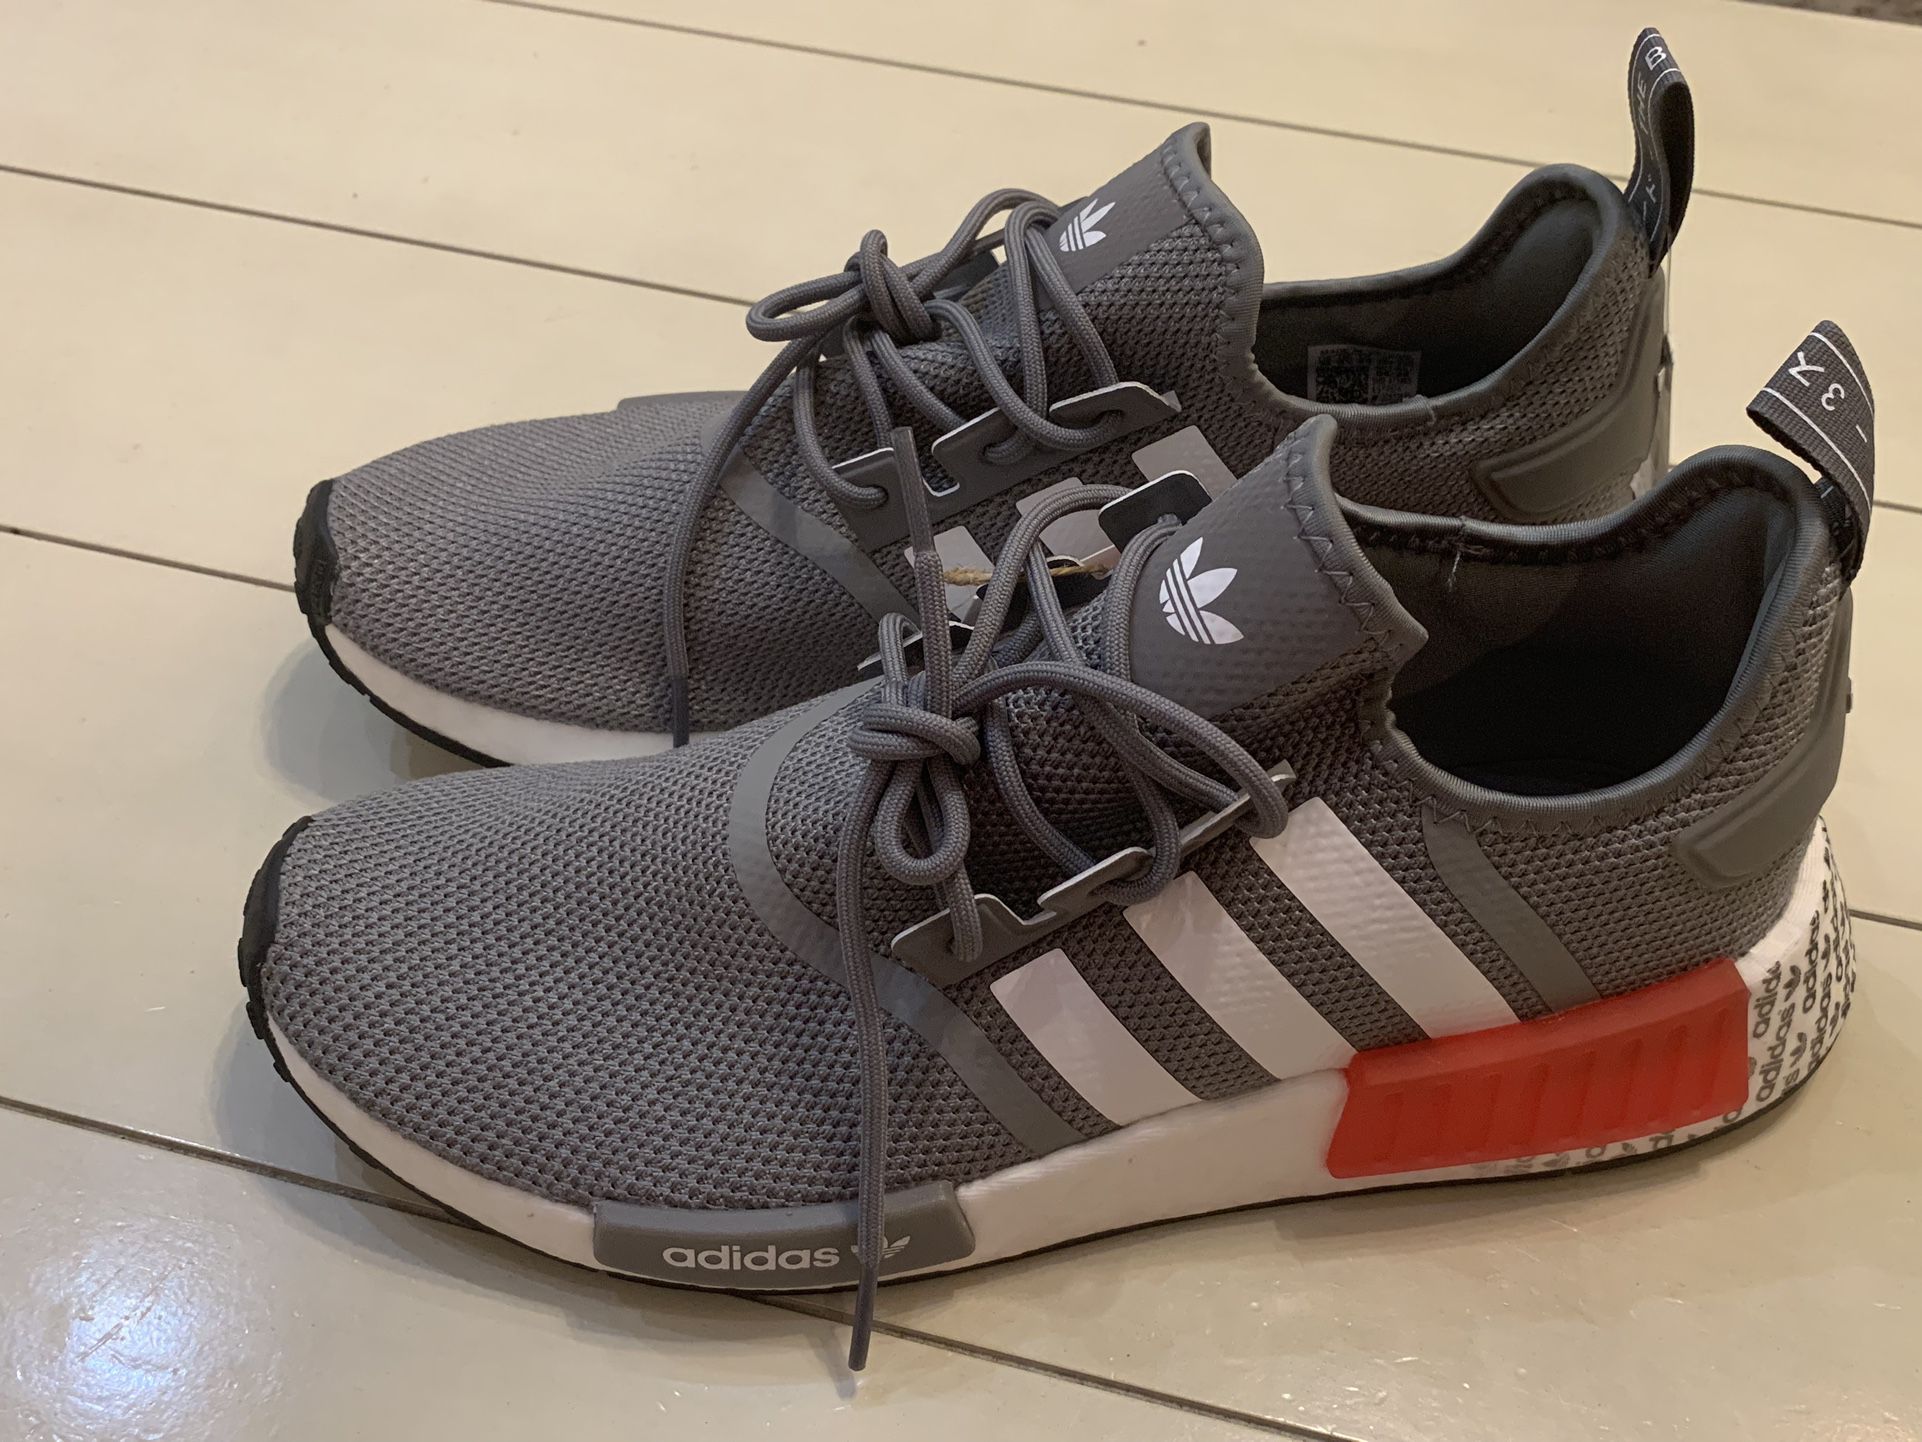 Myrde Sow jeans Adidas NMD R1 Mens Sz 10 'Grey Vivid Red' GY4874 for Sale in Kaysville, UT  - OfferUp